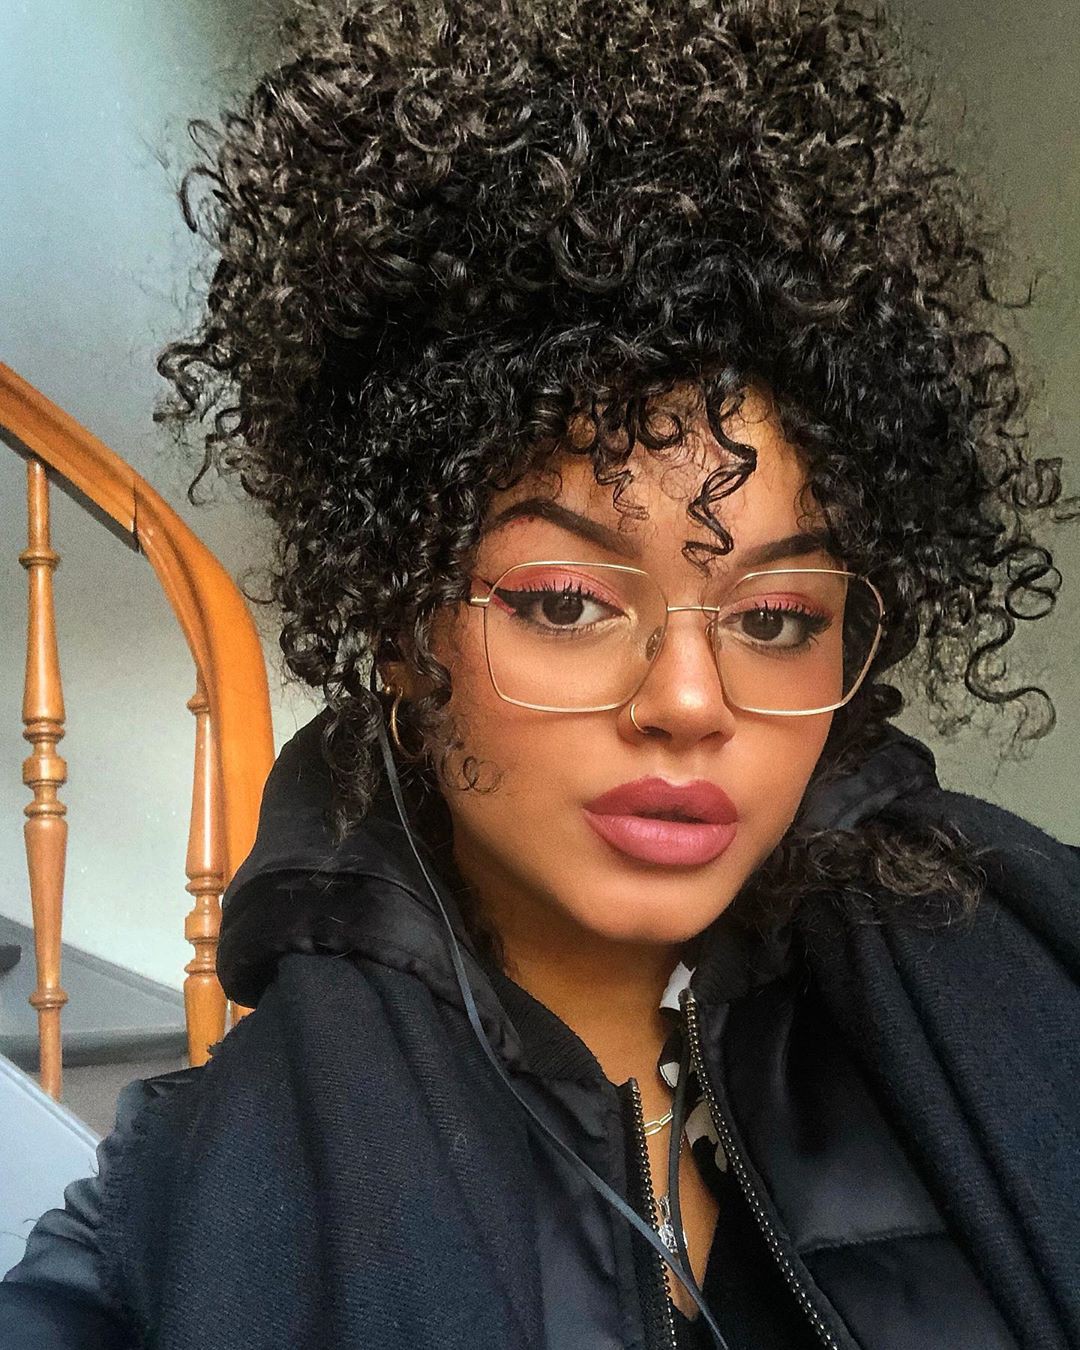 Sina Iuna Natural Black Hair, Glossy Lips, Hairstyle For Girls: Jheri Curl,  Black hair,  Jeans Outfit,  Turquoise Undergarment  